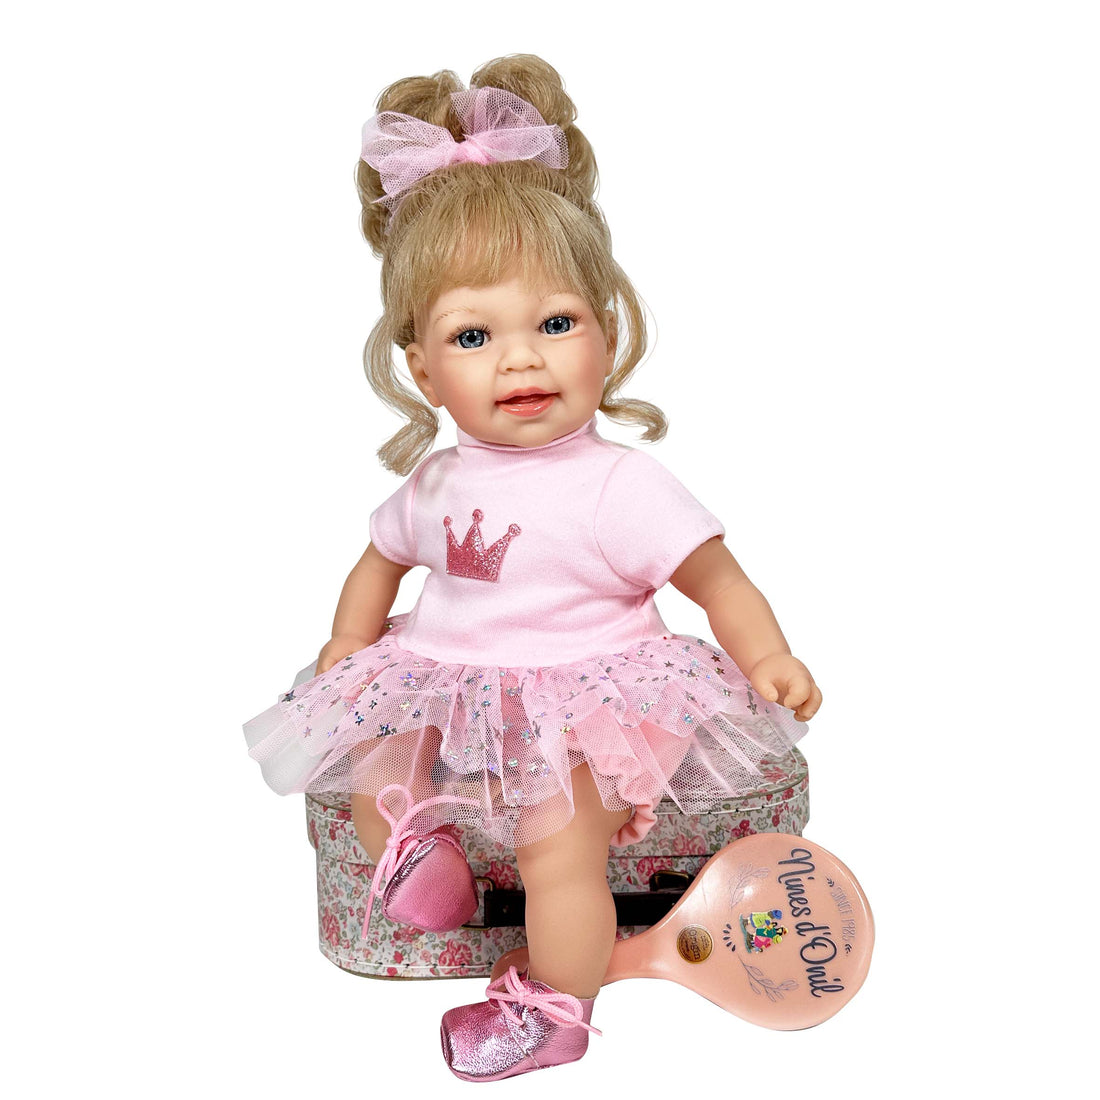 Handcrafted Little Susi Doll (3960) by Nines D&